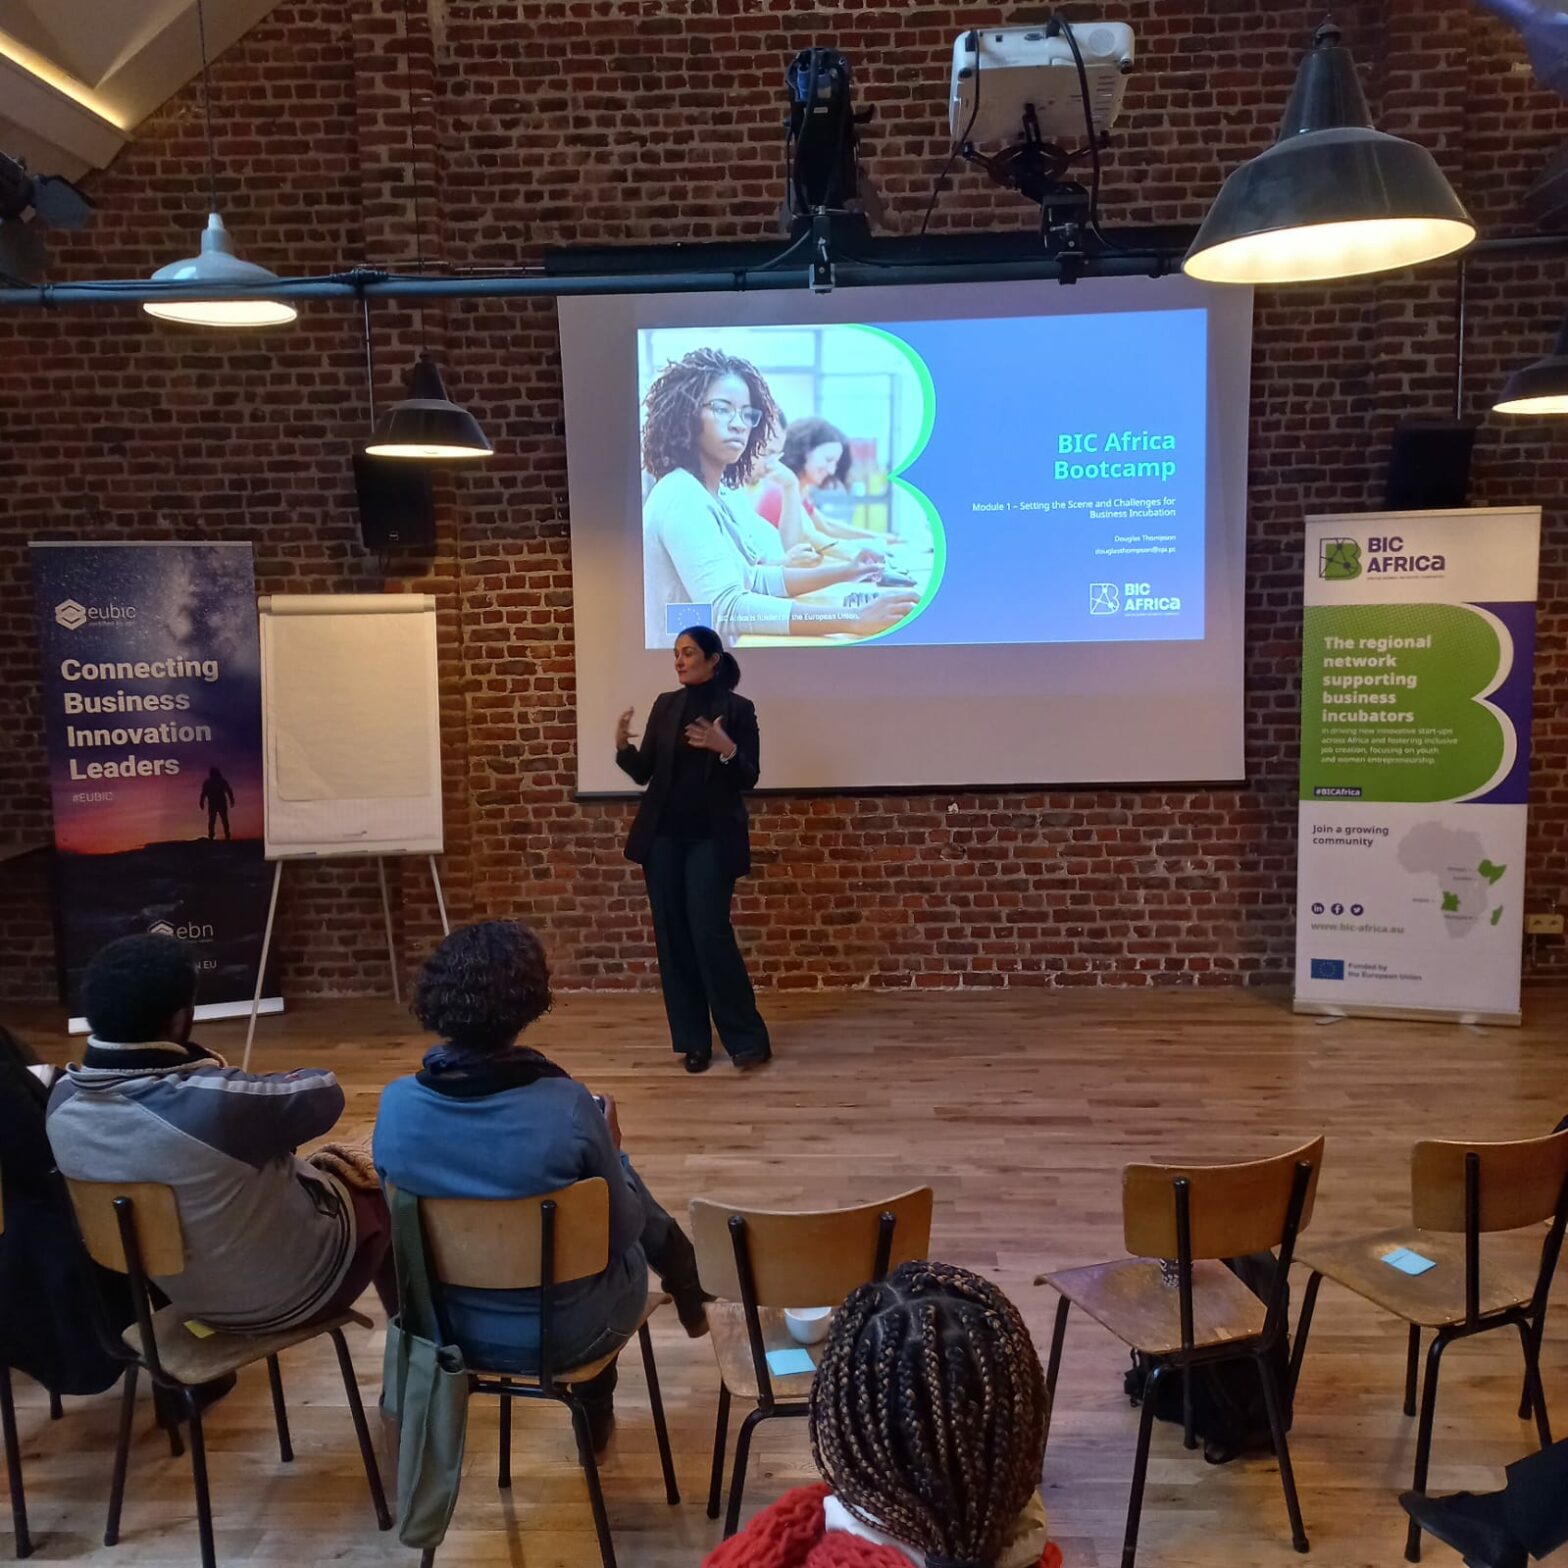 We’ve kicked off the first BIC Africa Bootcamp in Brussels, Belgium